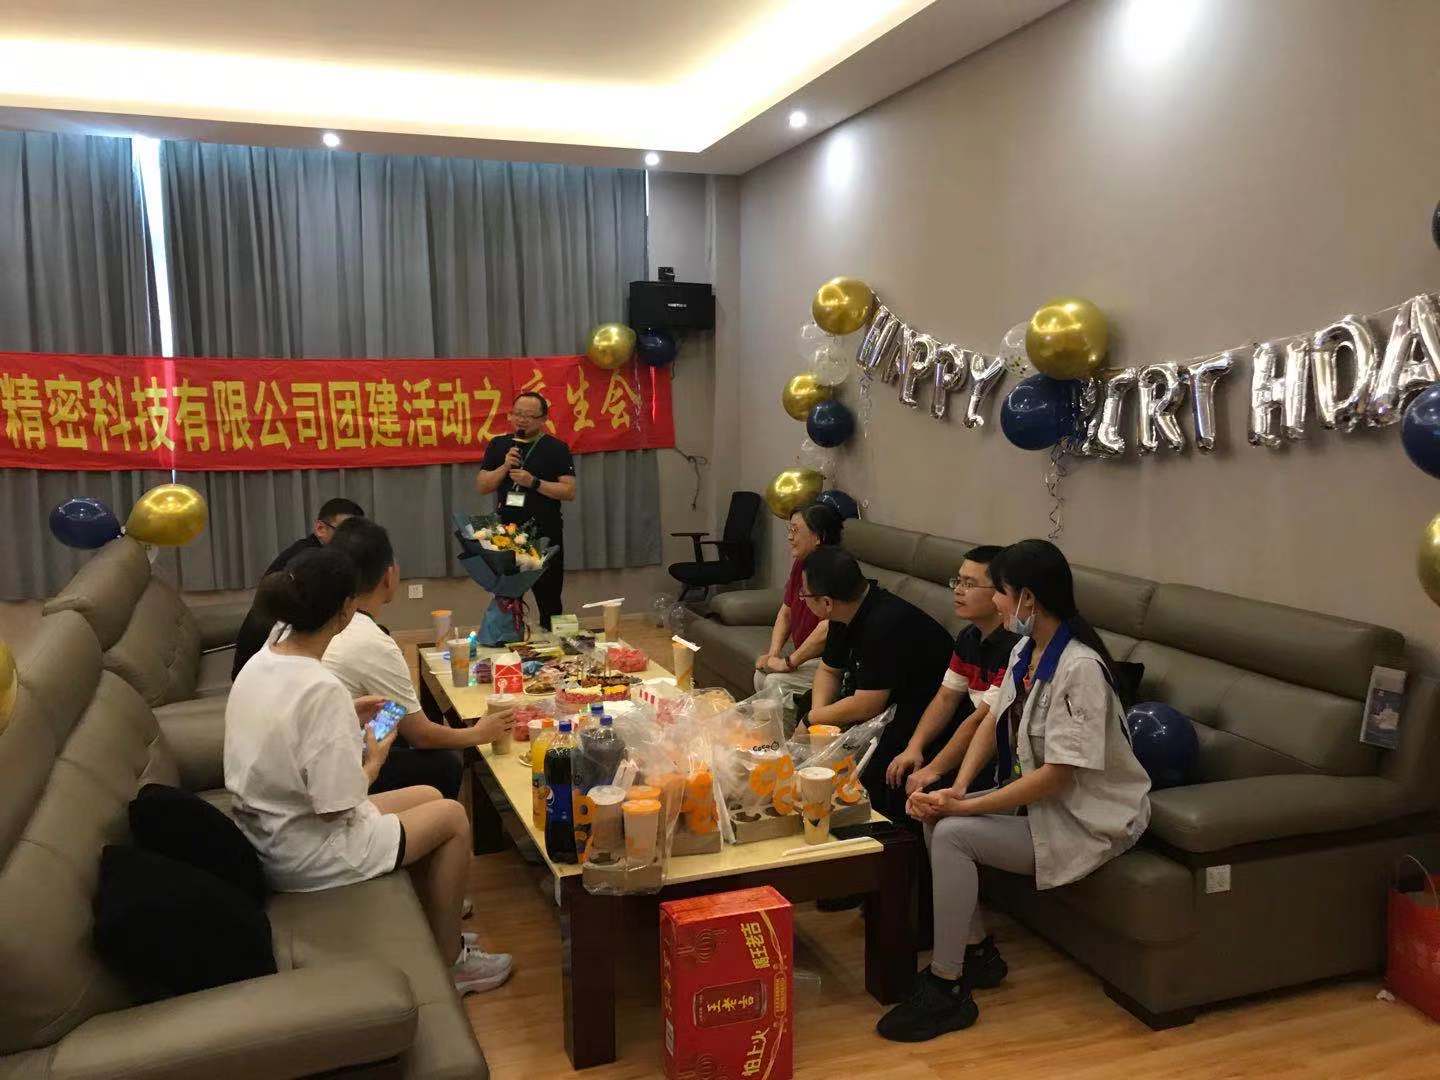 Share The Good, Warm Forward--Denseting Group Held A Heartwarming Collective Birthday Party For Its Employees.